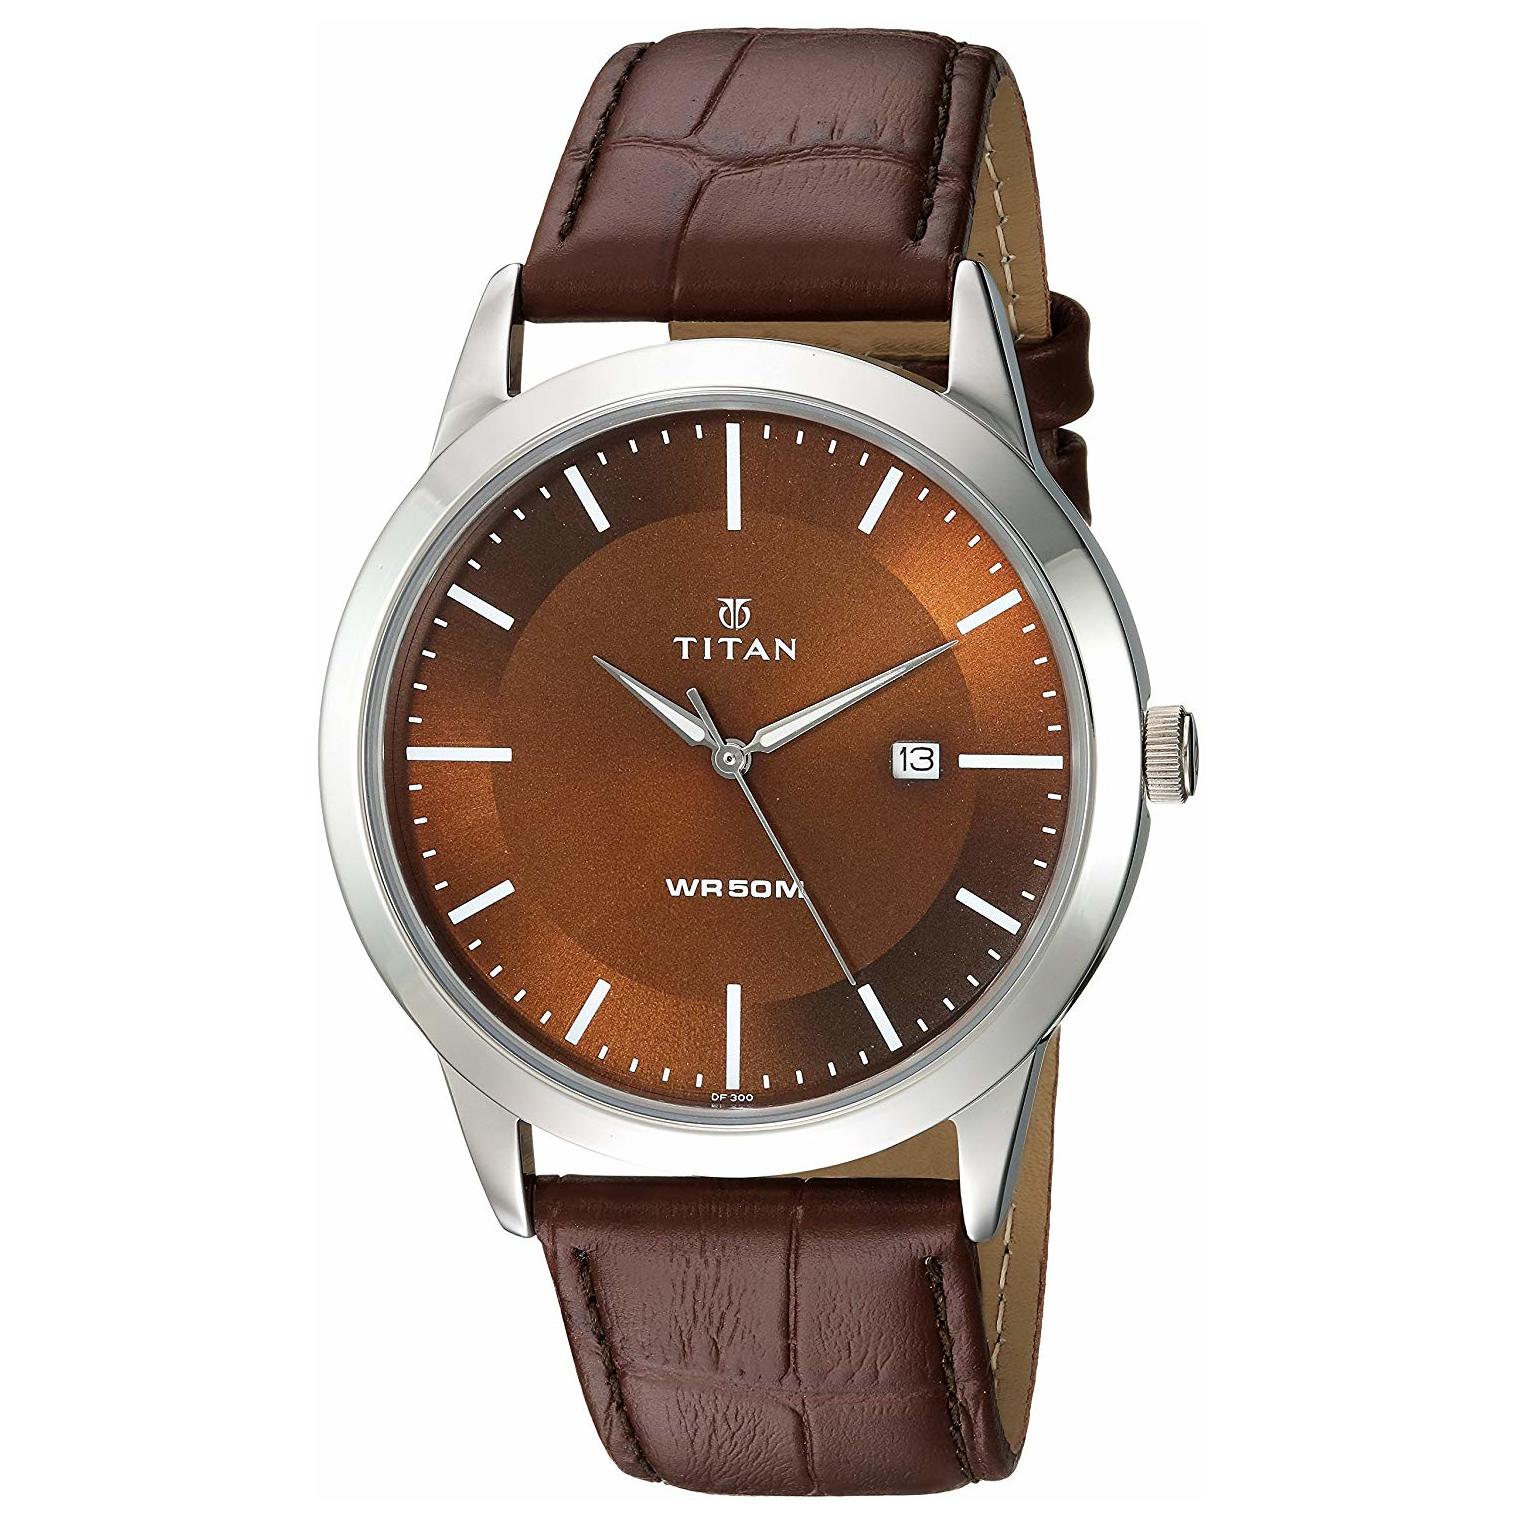 Titan 1584SL04 Brown Dial Analog Watch with Date Function for Men